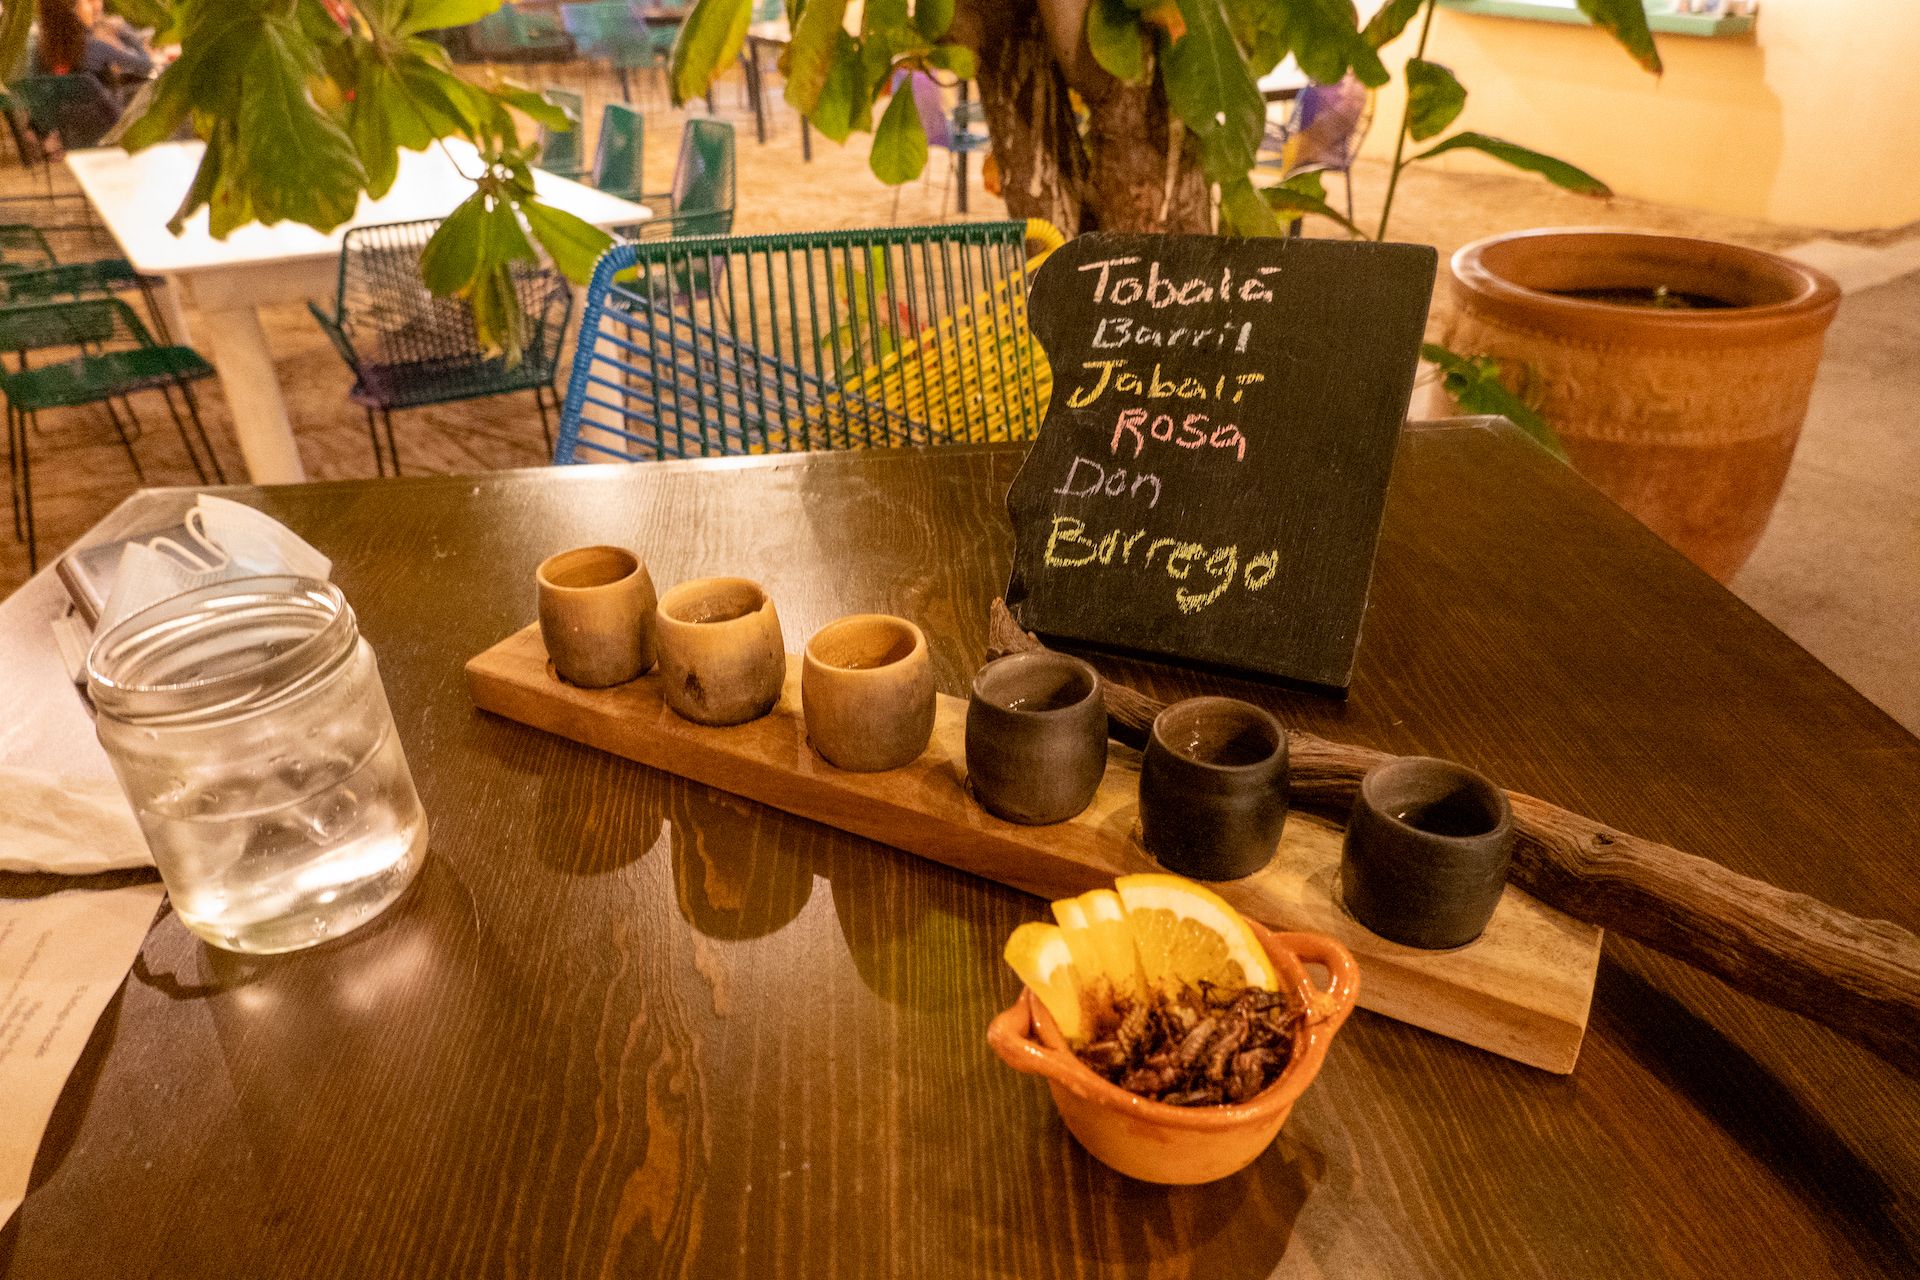 Mezcal tasting flight served with orange slices and fried grasshoppers to reset the palette between tasting.